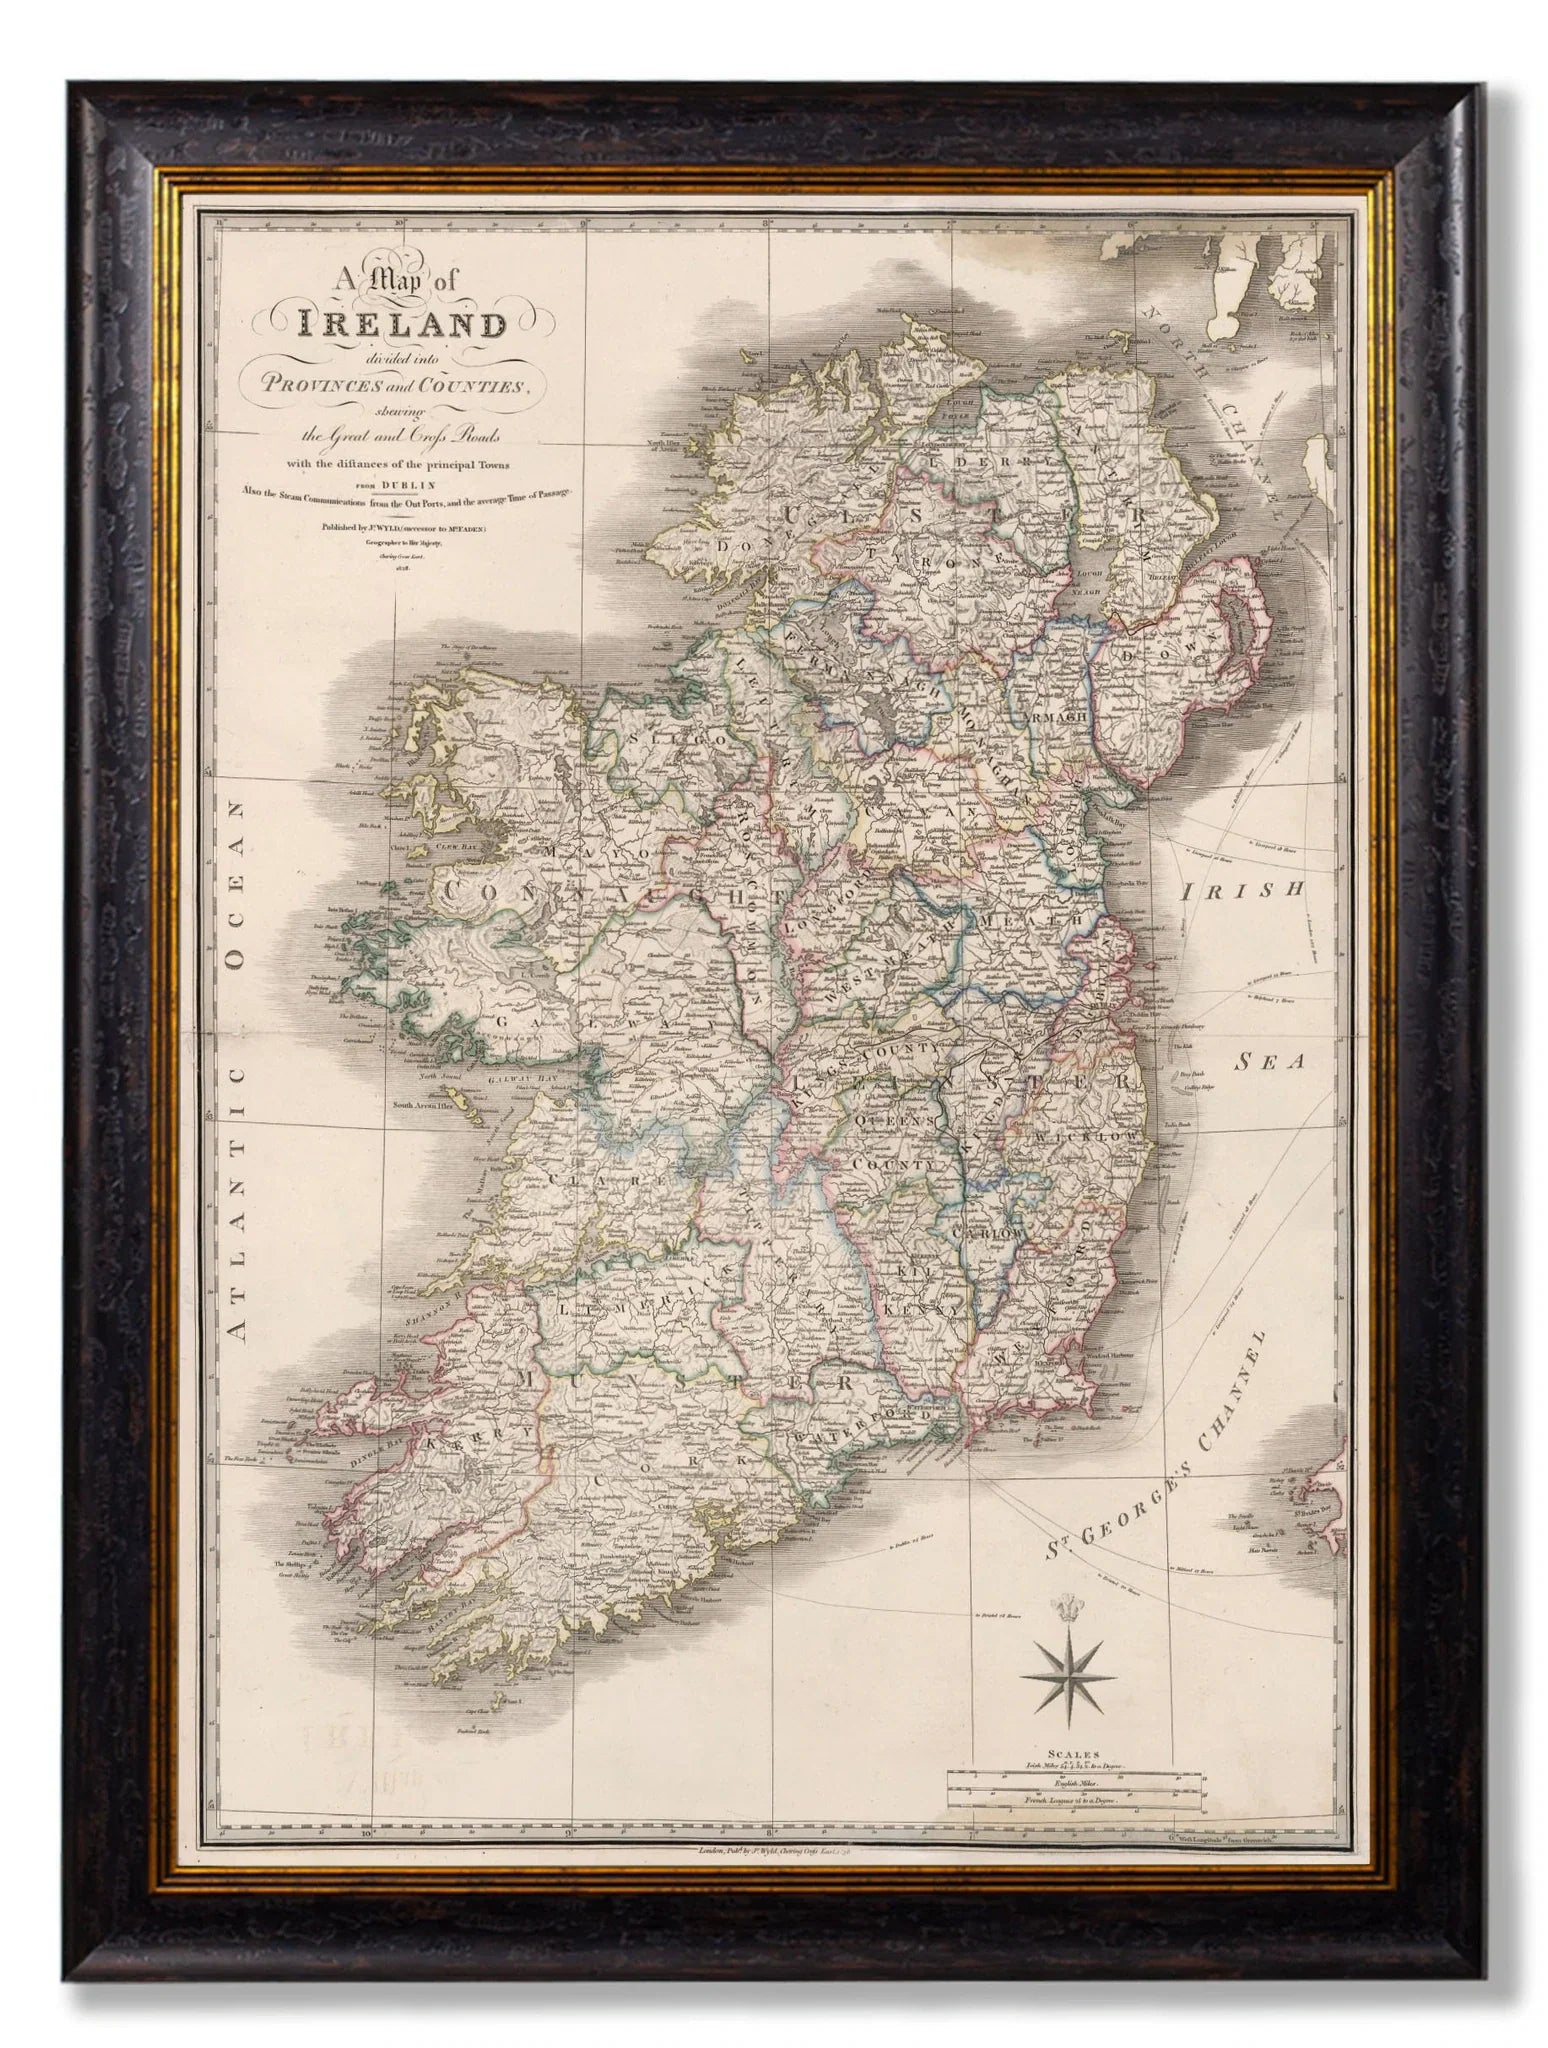 C.1838 Map of Ireland frame for sale - Woodcock and Cavendish